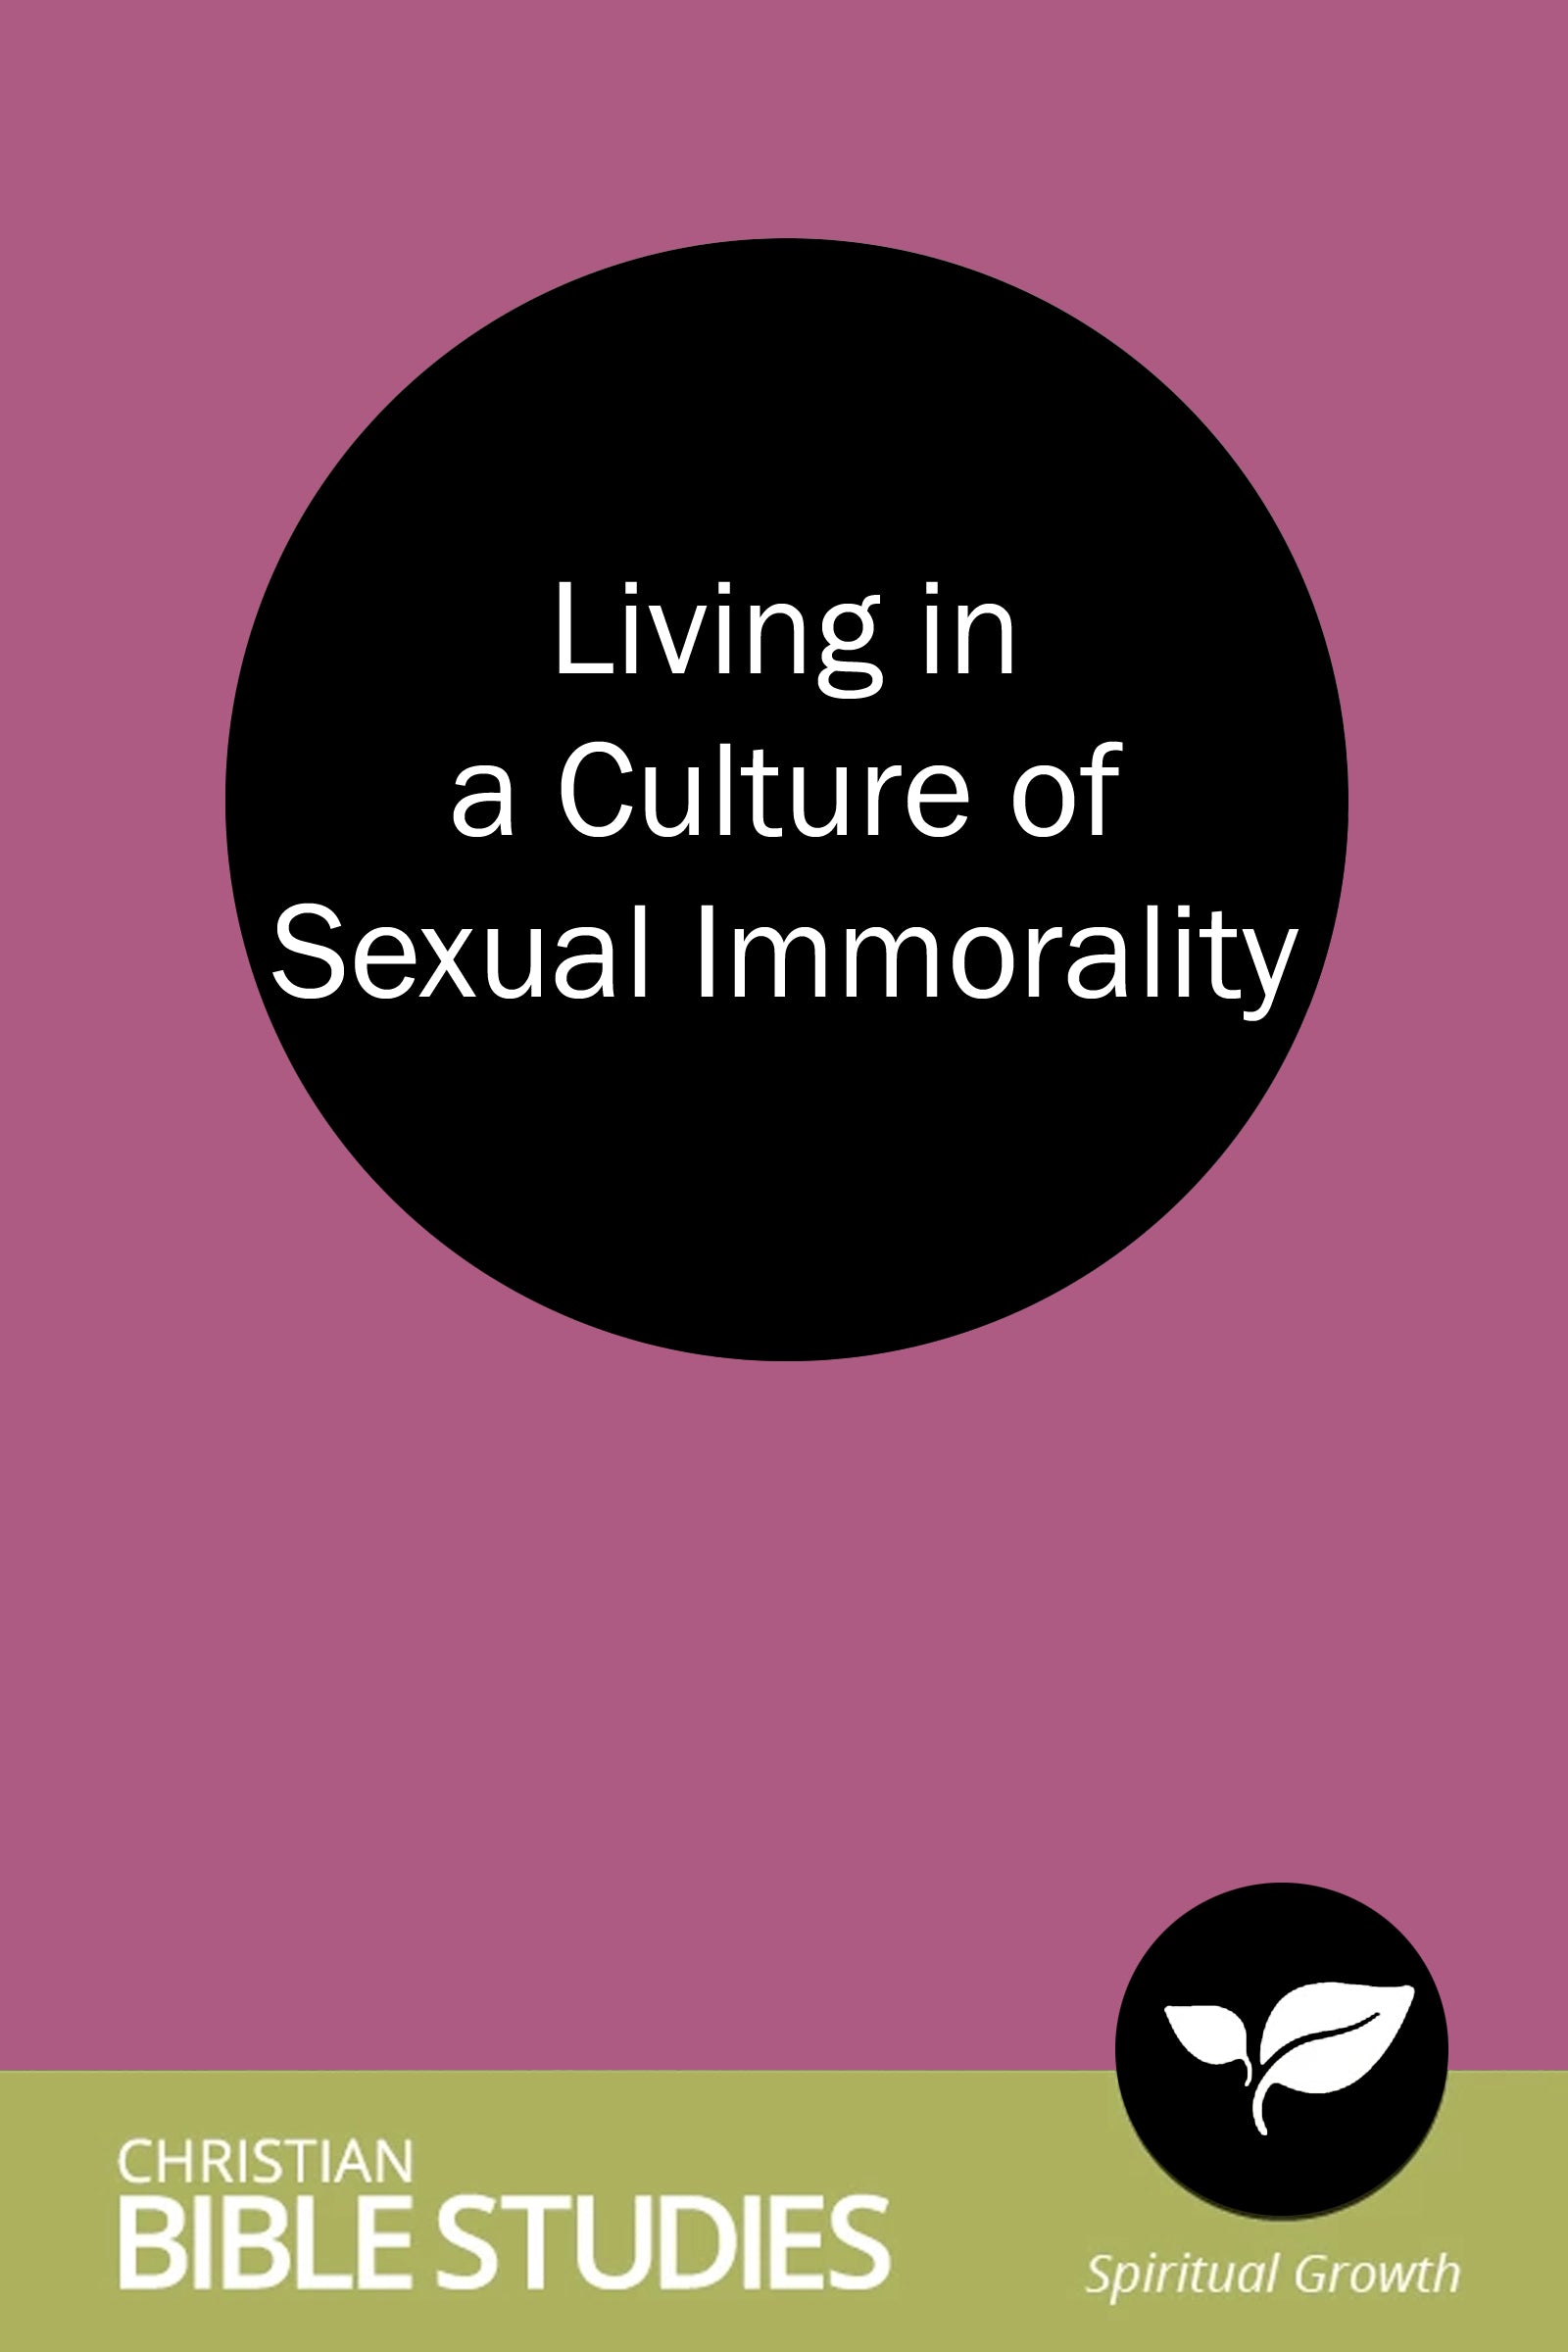 Living in a Culture of Sexual Immorality